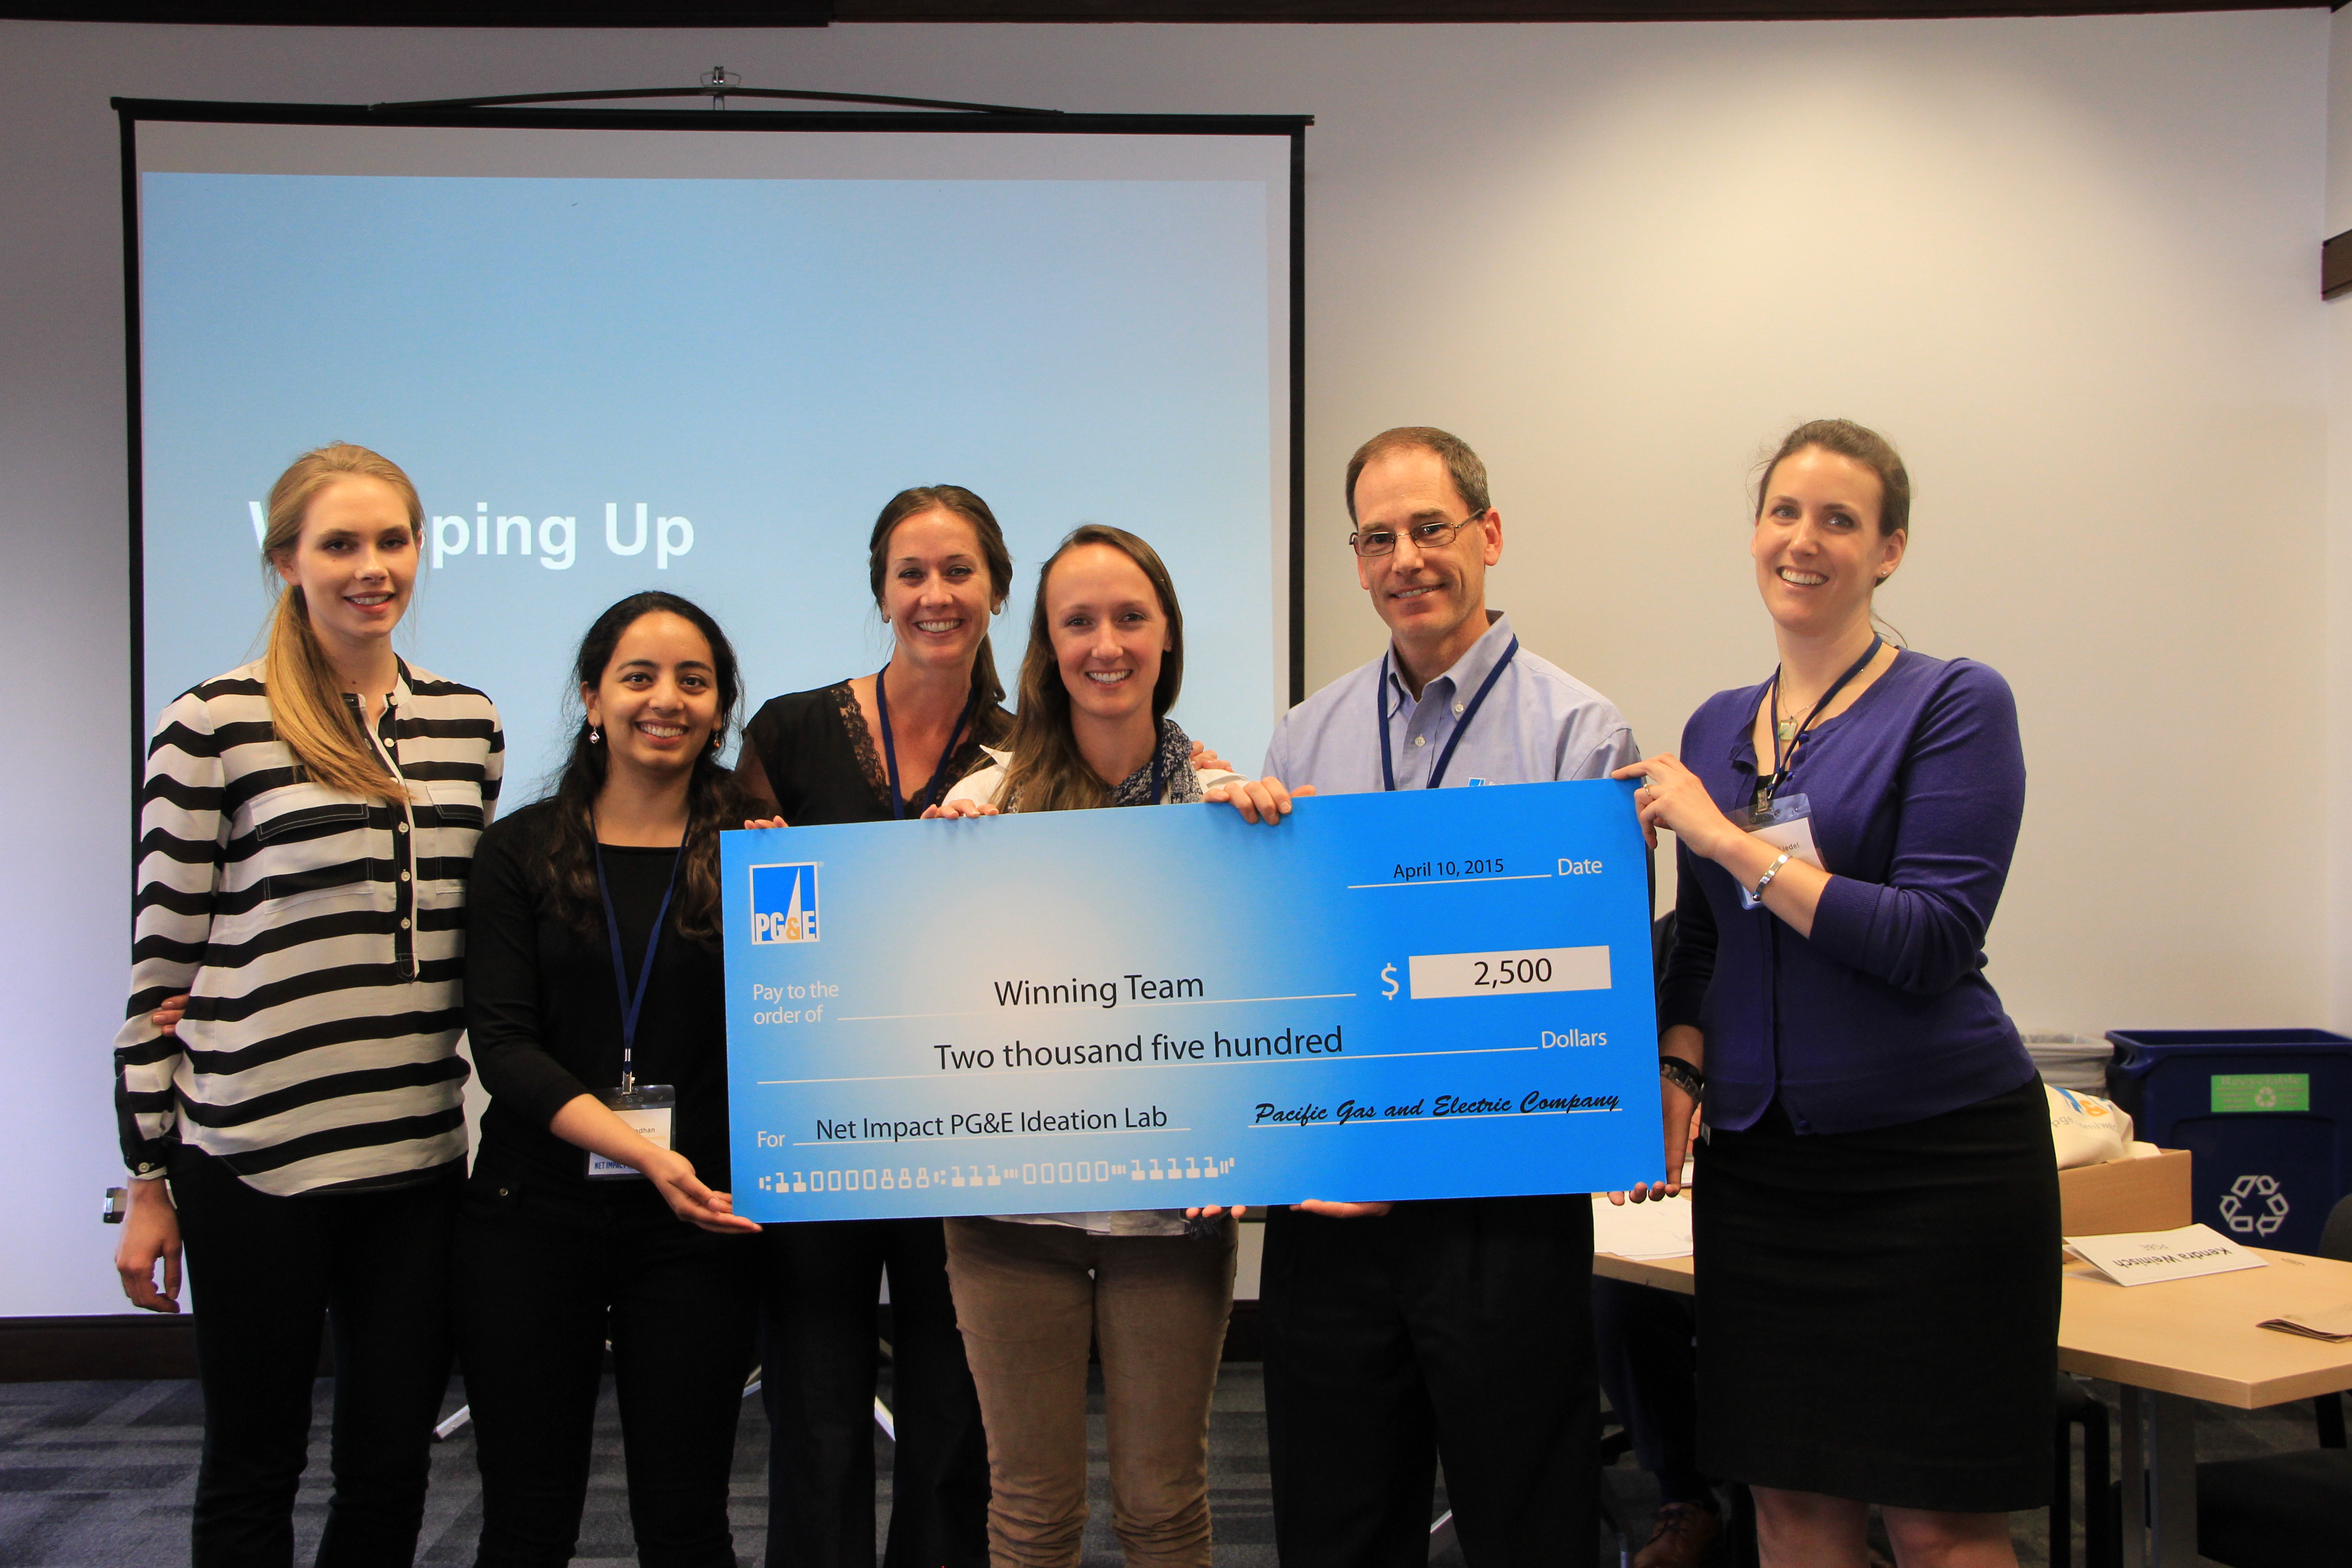 Student winners of the PG&E Energy Ideation Lab received a big check for their Net Impact chapter.